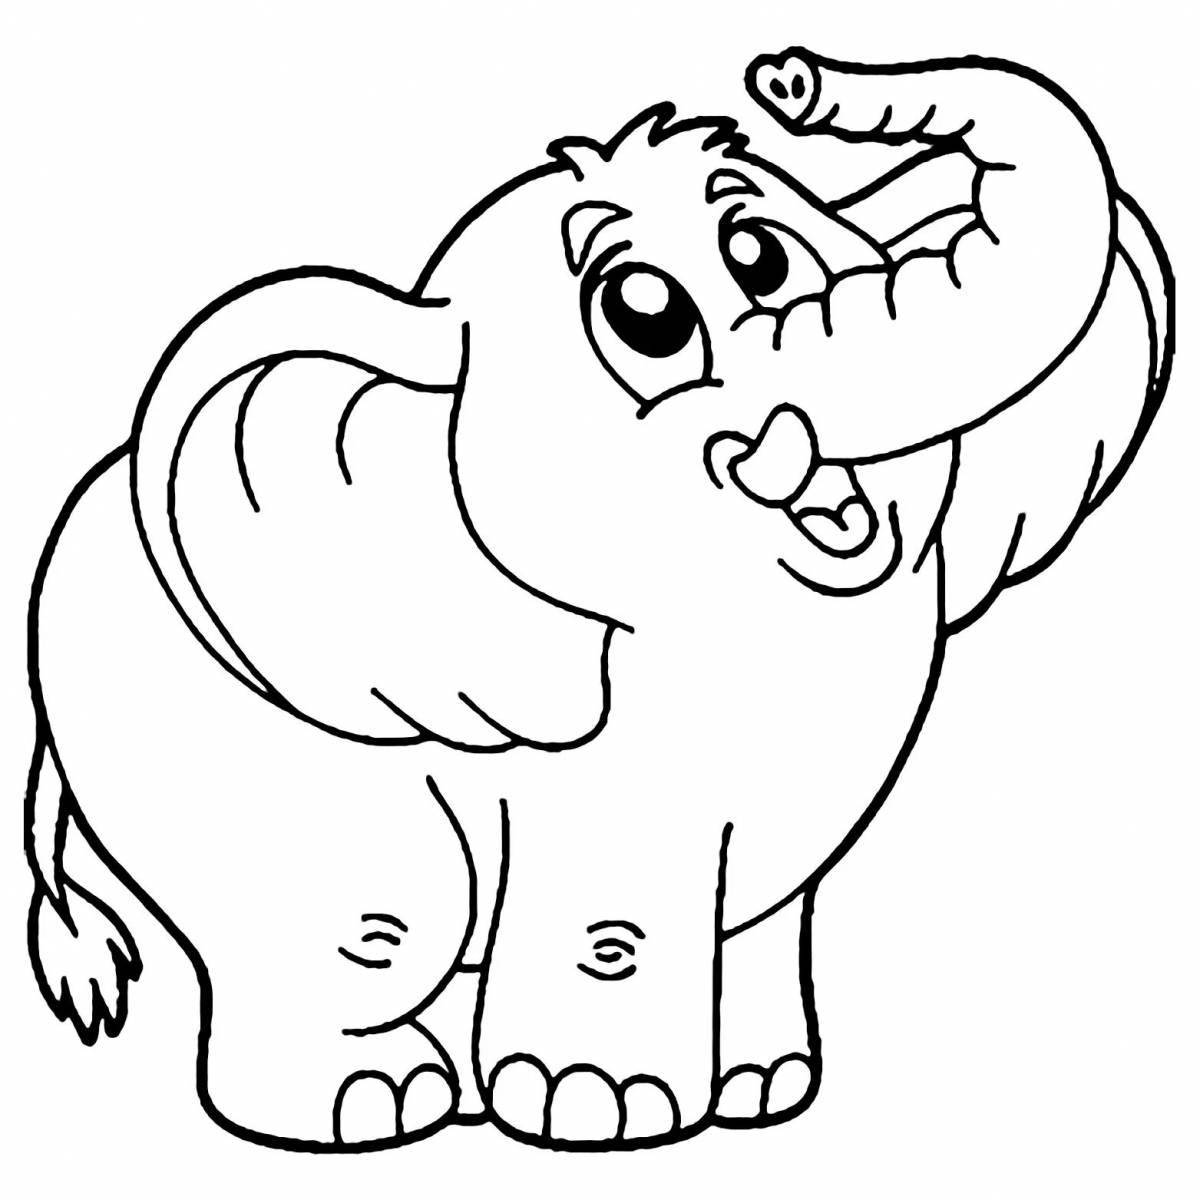 Joyful elephant coloring pages for kids